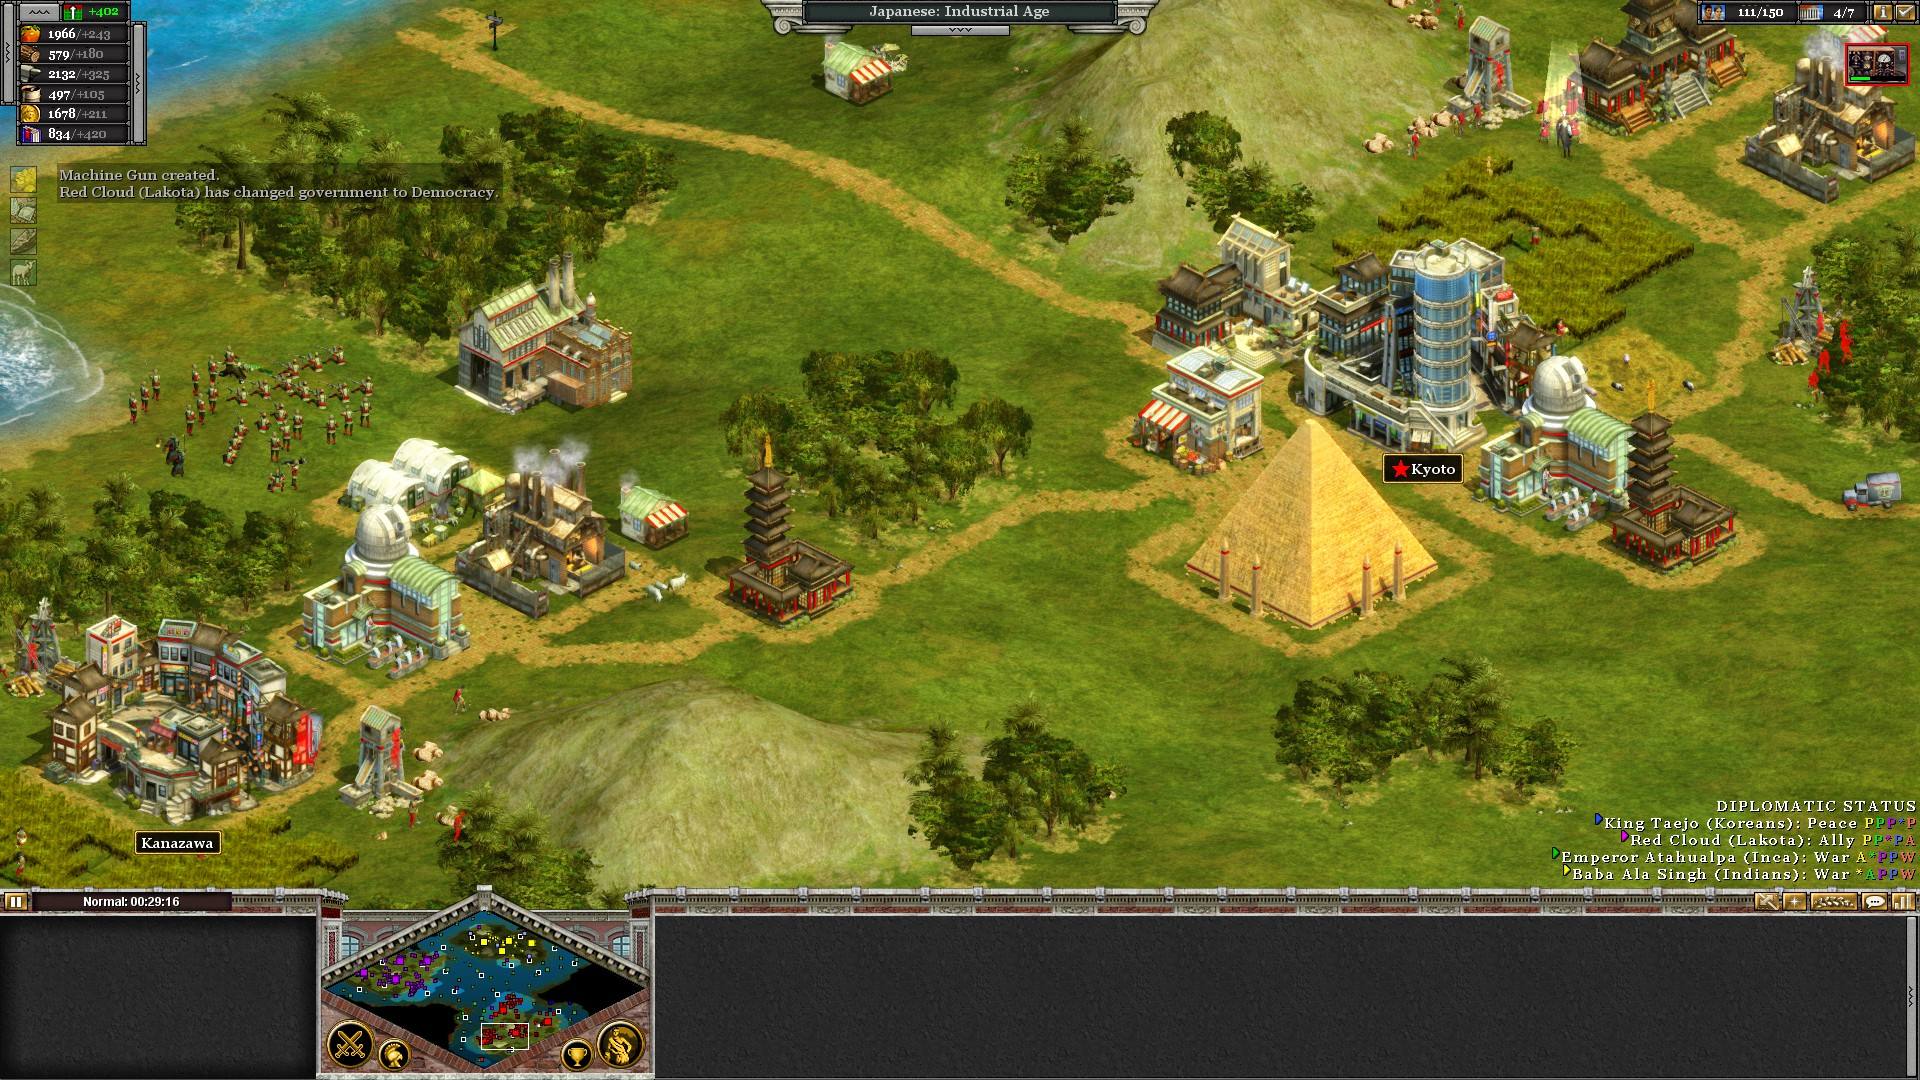 Rise Of Nations Extended Edition V0.2009 [trainer +12]